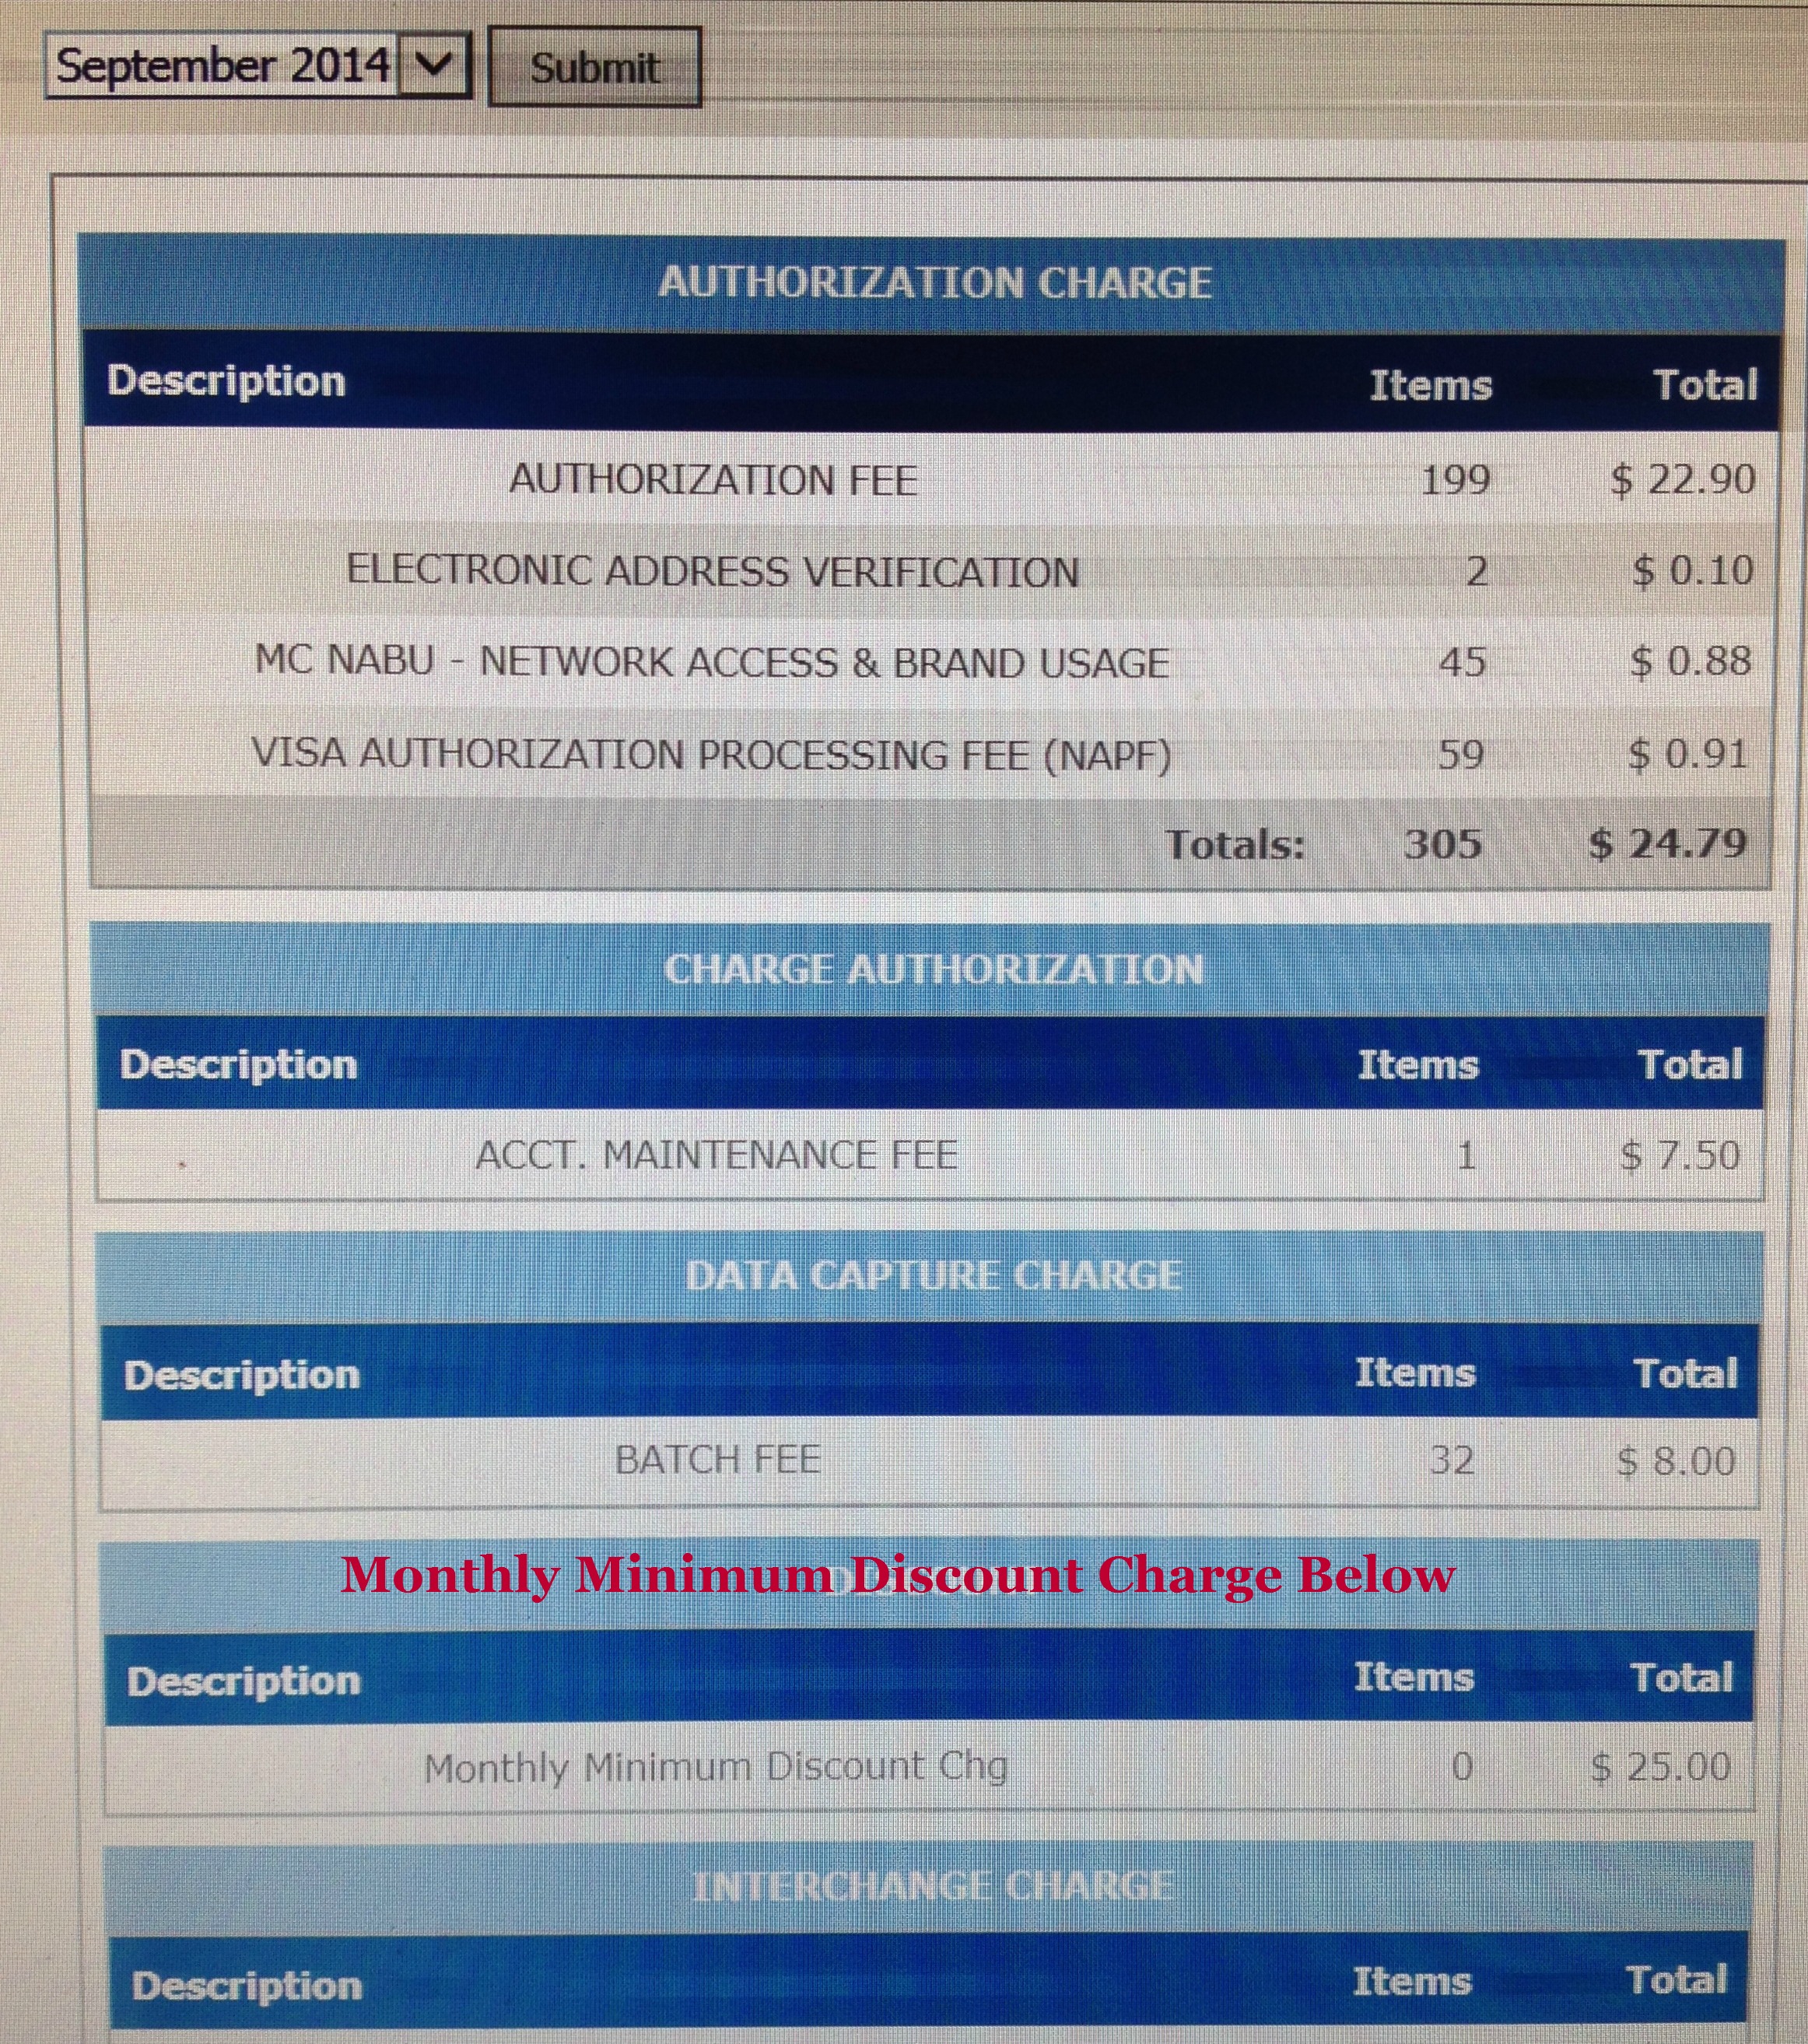 Copy of online detail showing $25 minimum balance discount charge for September 2014